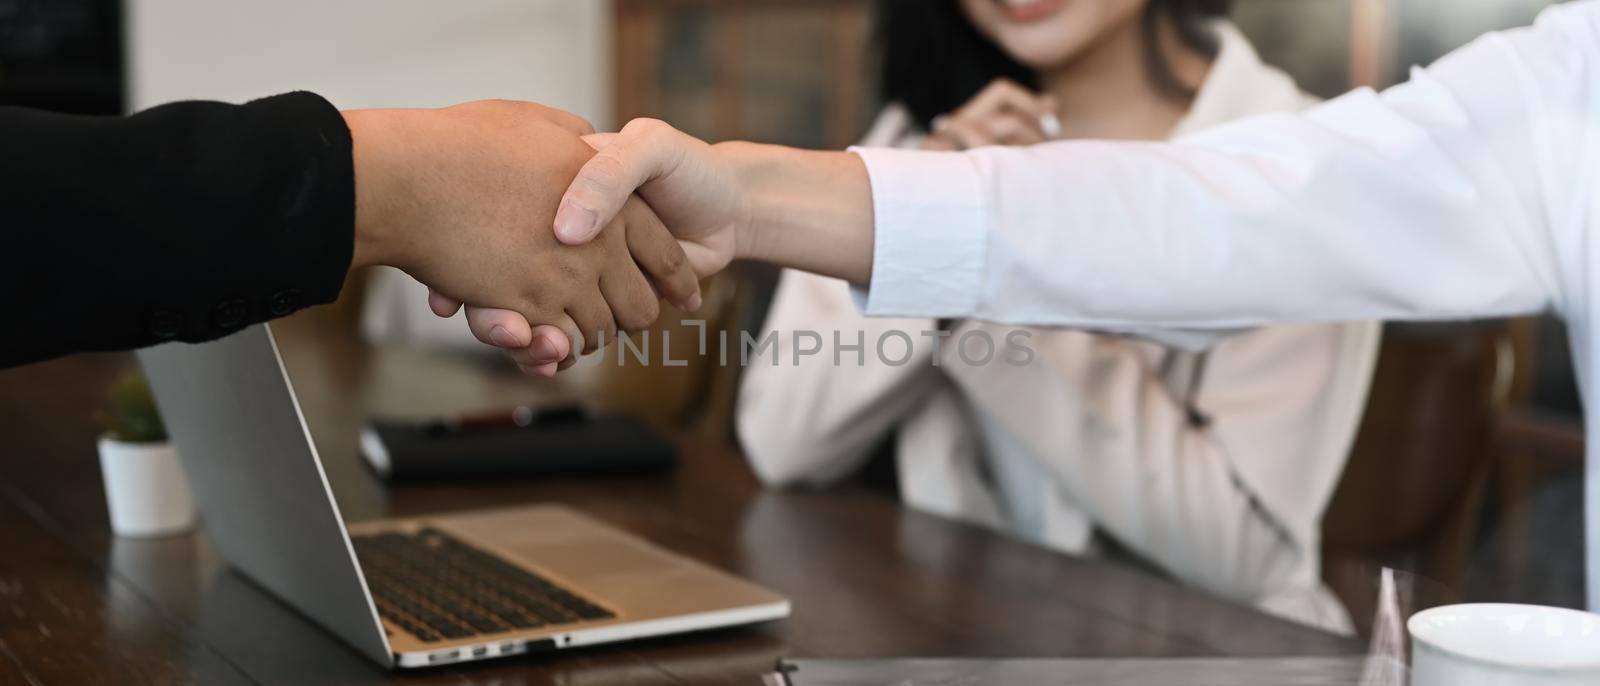 Business people shaking hands, finishing up meeting or negotiation in office by prathanchorruangsak